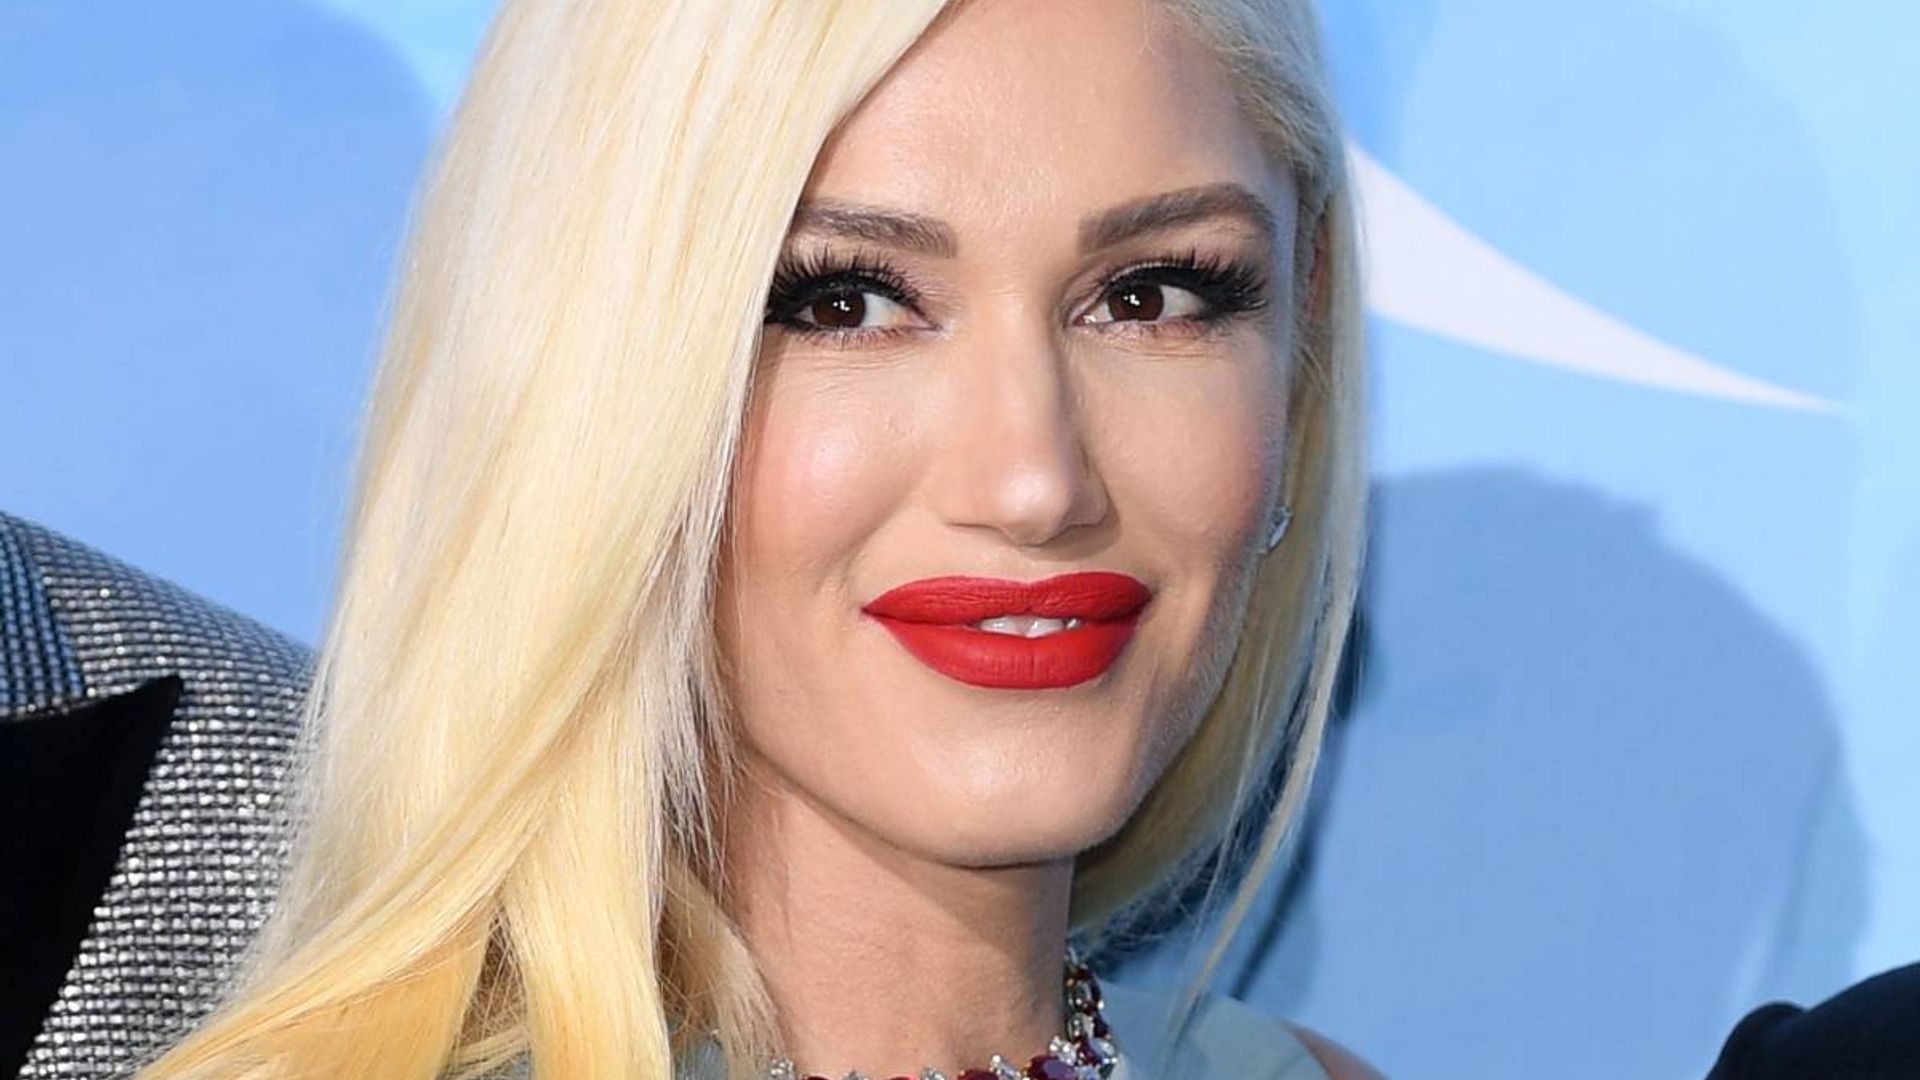 Gwen Stefani's son Kingston shares sweet photo with brother Zuma on the beach